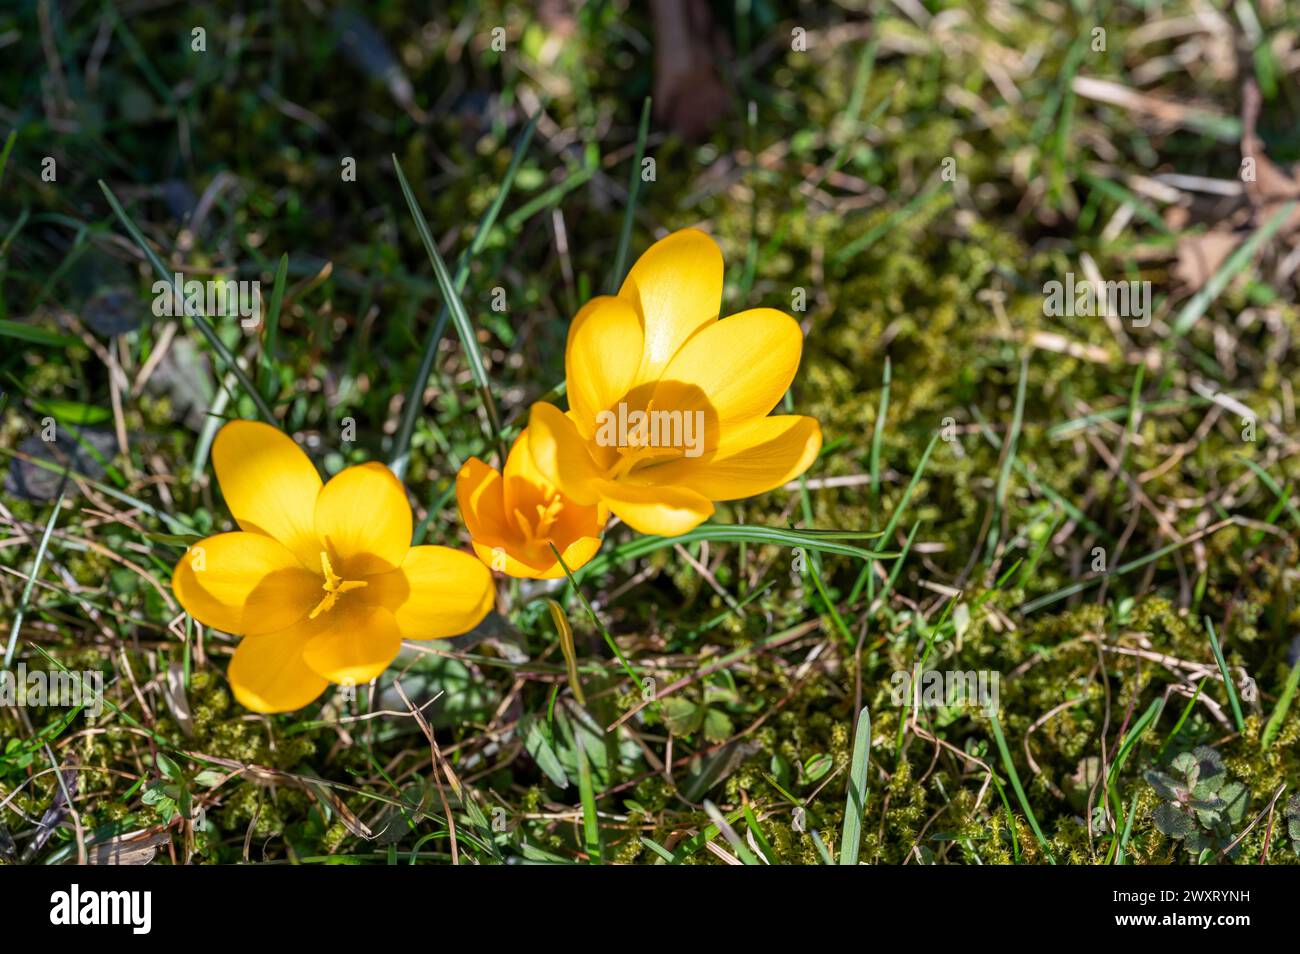 Yellow Crocus growing in a green mossy lawn Stock Photo